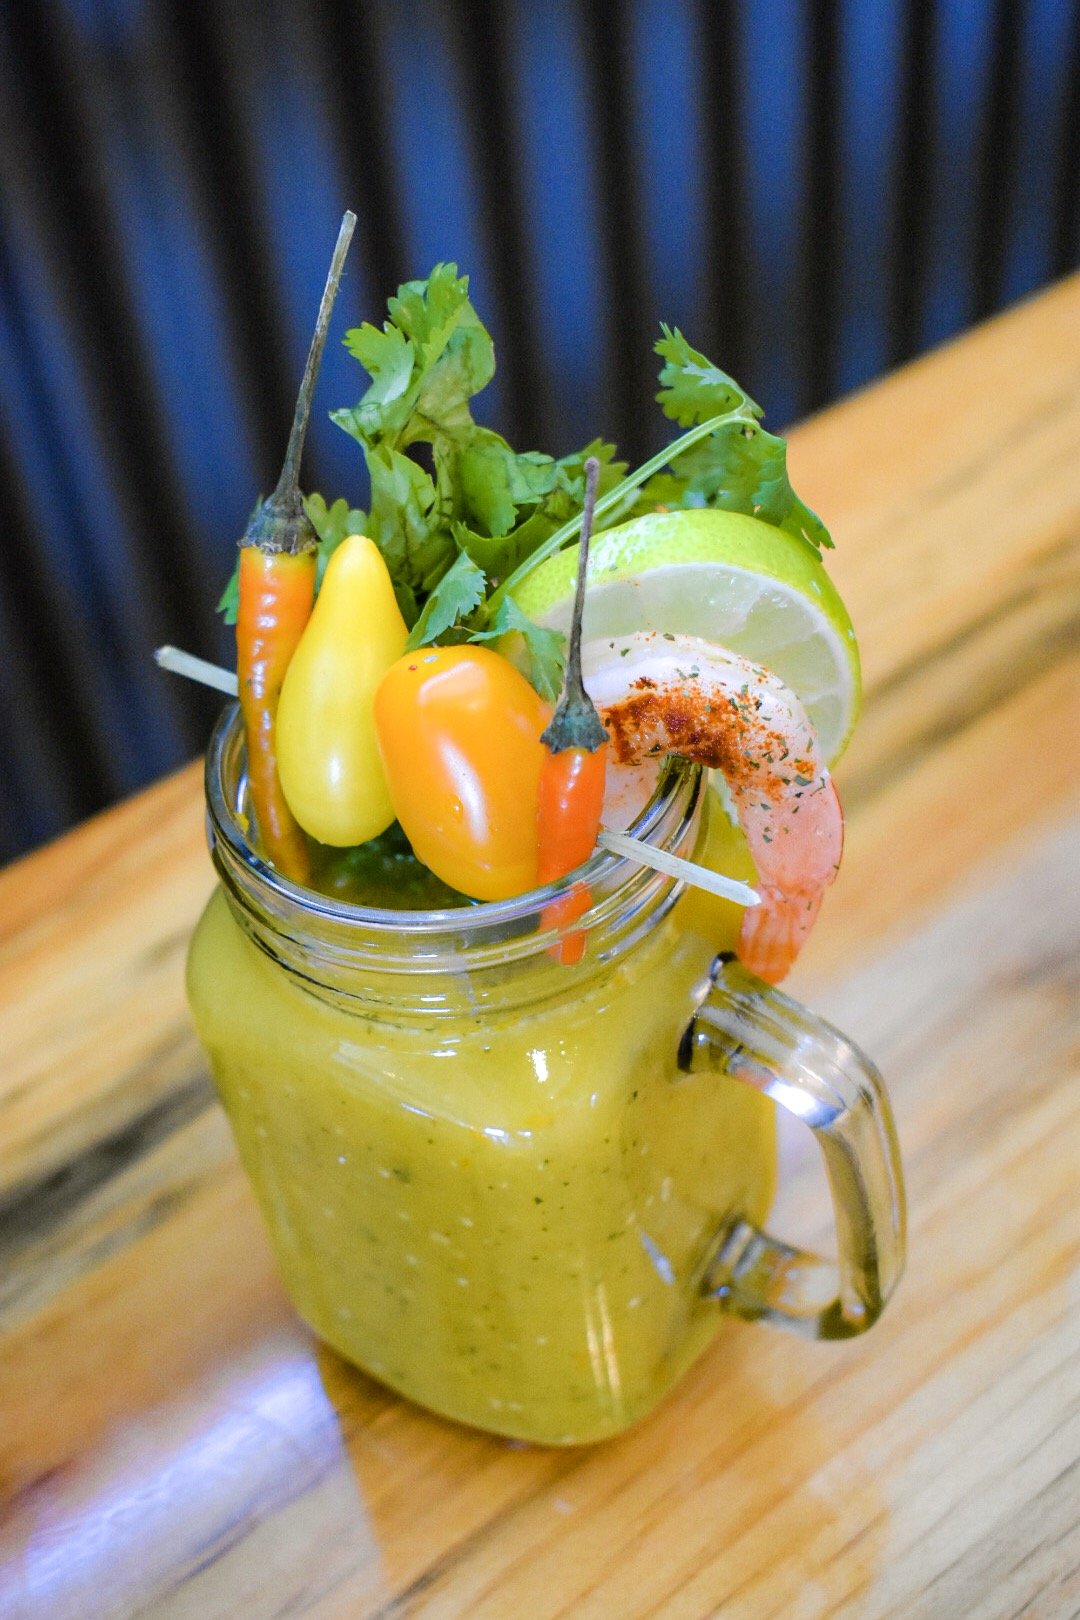 summer+green+tomatillo+bloody+mary+recipe+bloody+mary+obsessed+2.jpg